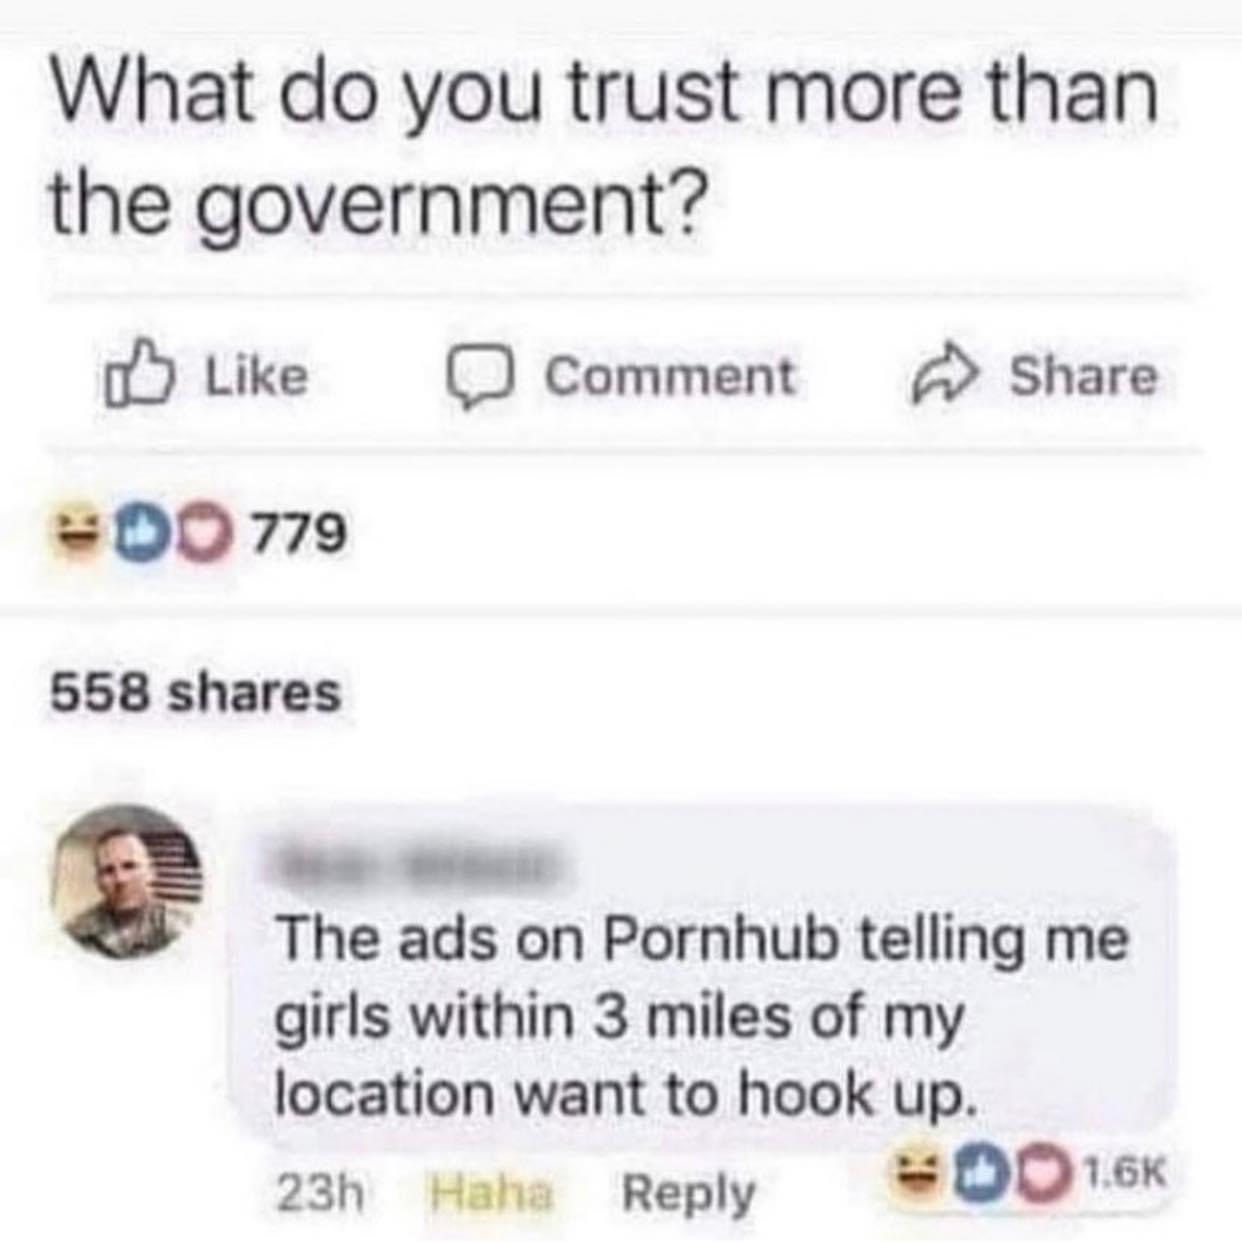 much do you trust the government meme - What do you trust more than the government? Comment Do 779 558 The ads on Pornhub telling me girls within 3 miles of my location want to hook up. 23h Haha Woo